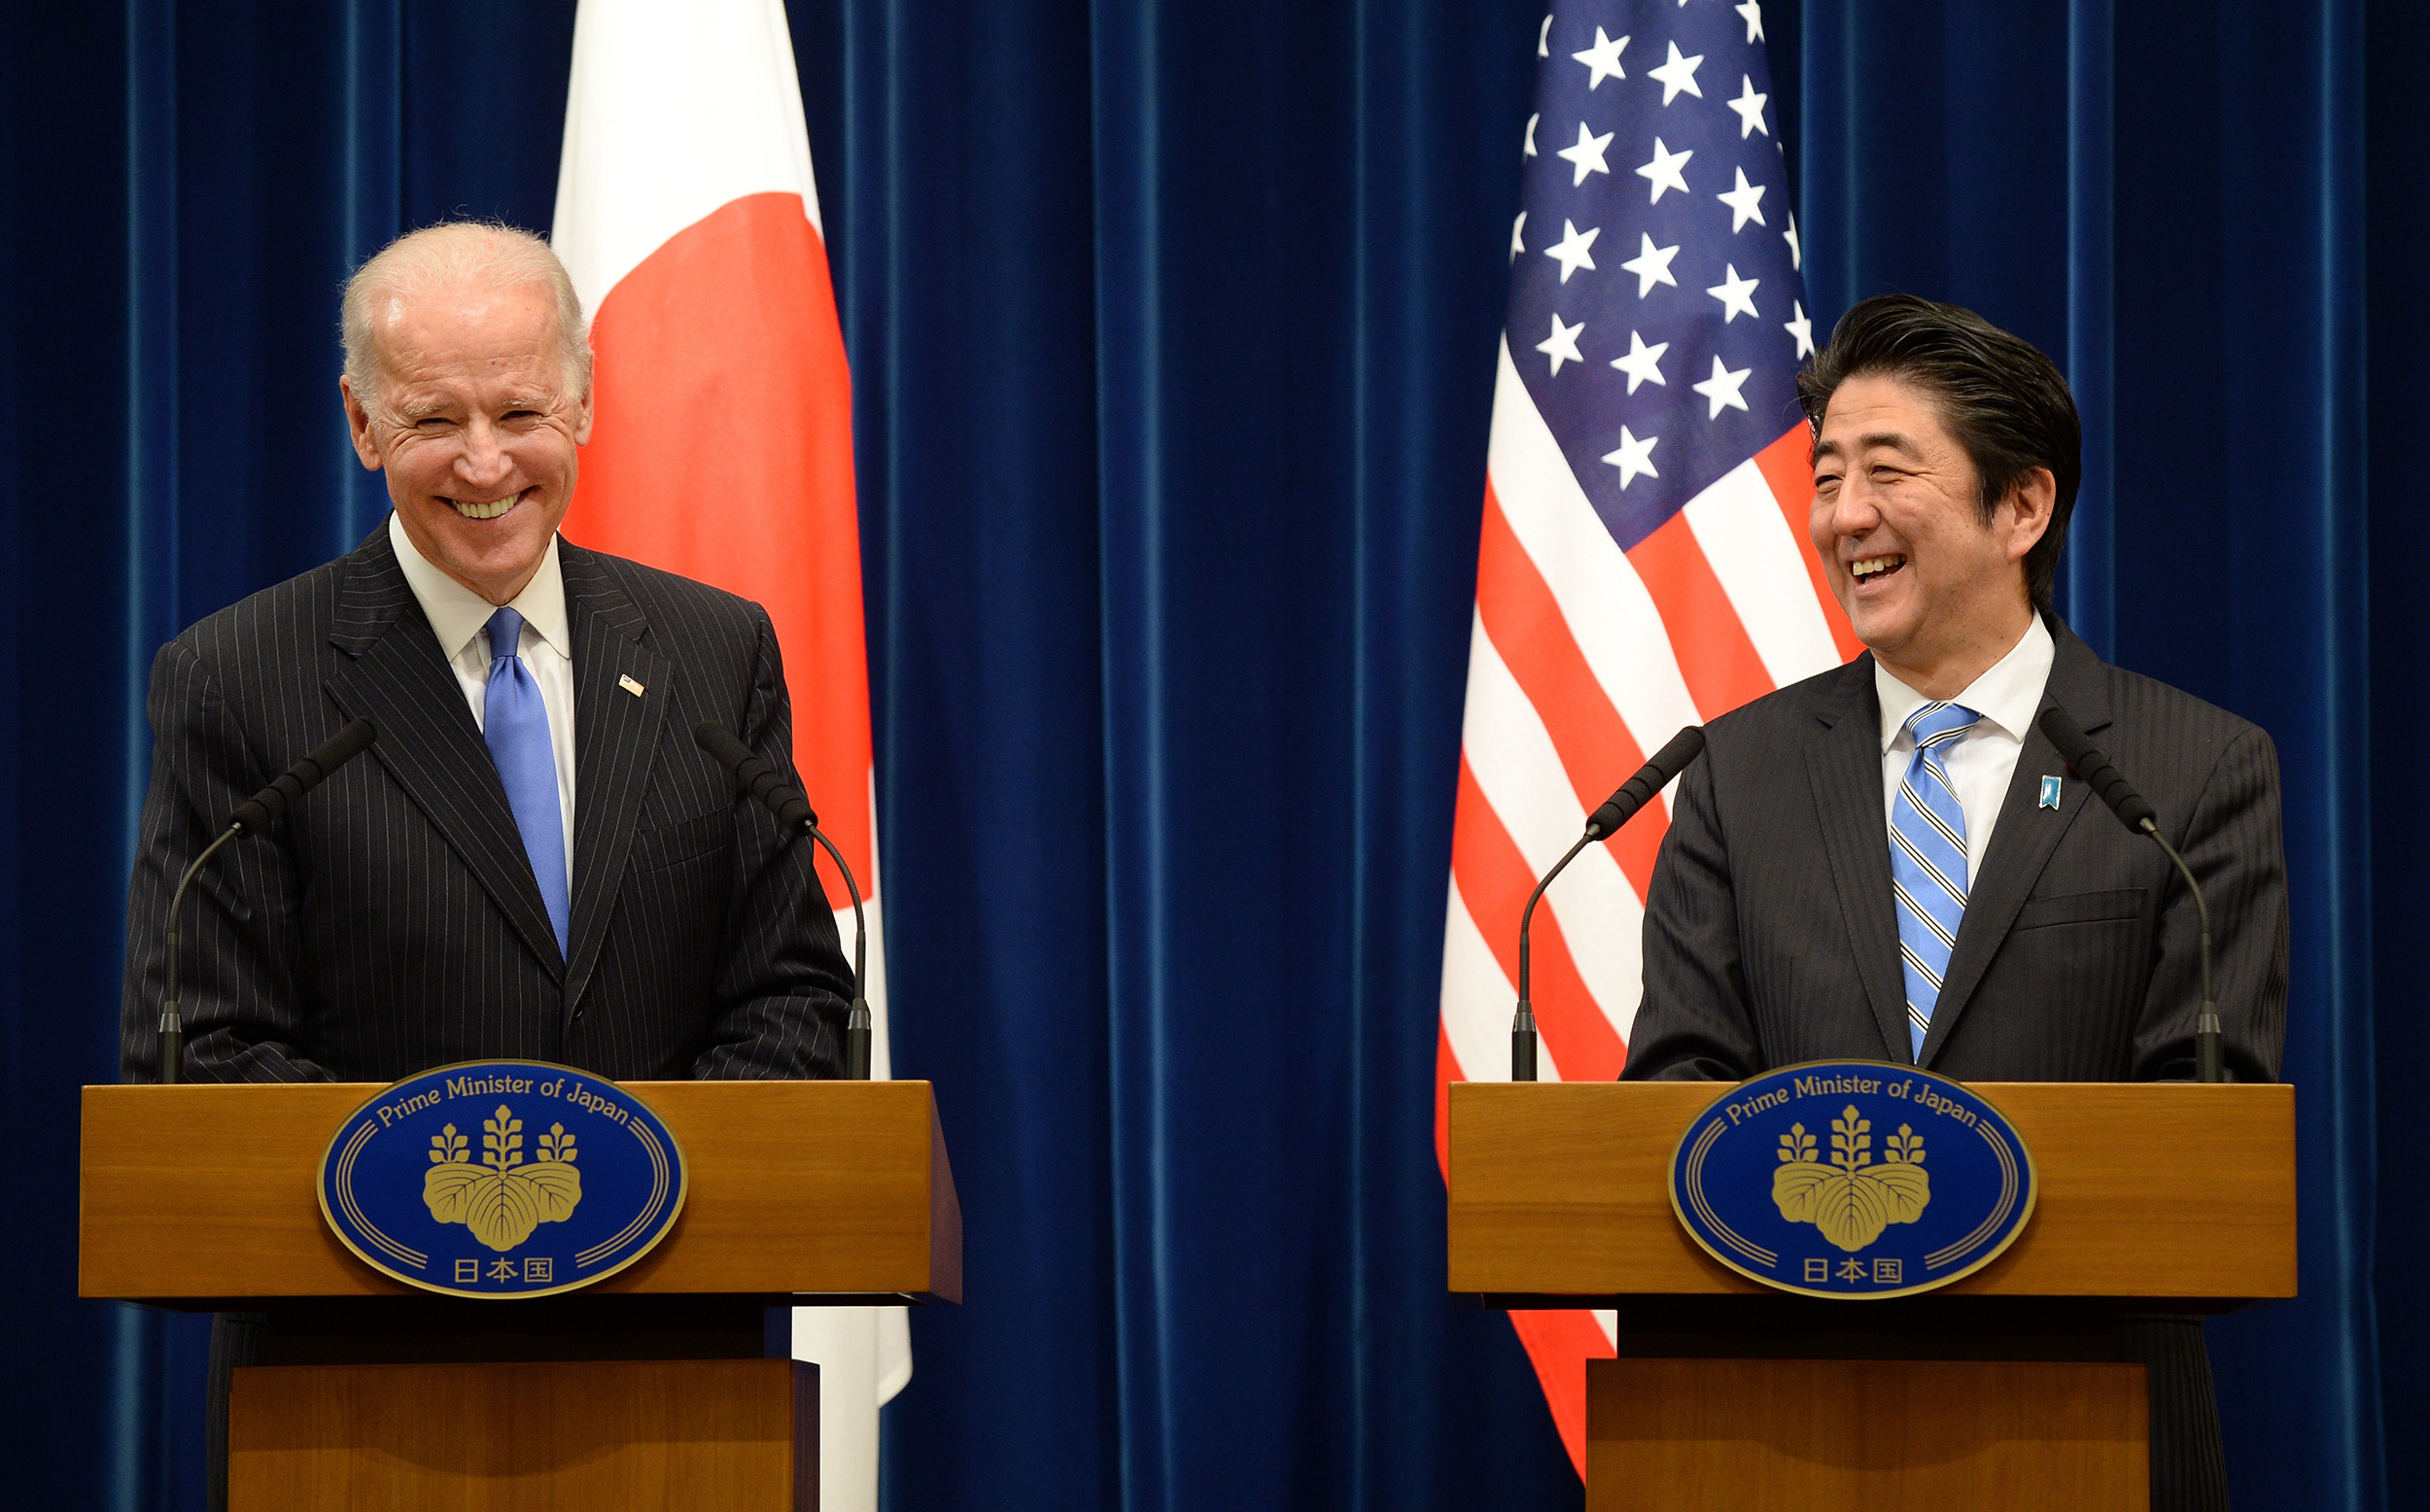 Then US Vice President Joe Biden, left, shares a laugh with Japanese Prime Minister Shinzo Abe during a joint press conference after their meeting at Abe's official residence in Tokyo, Japan, on December 3, 2013.